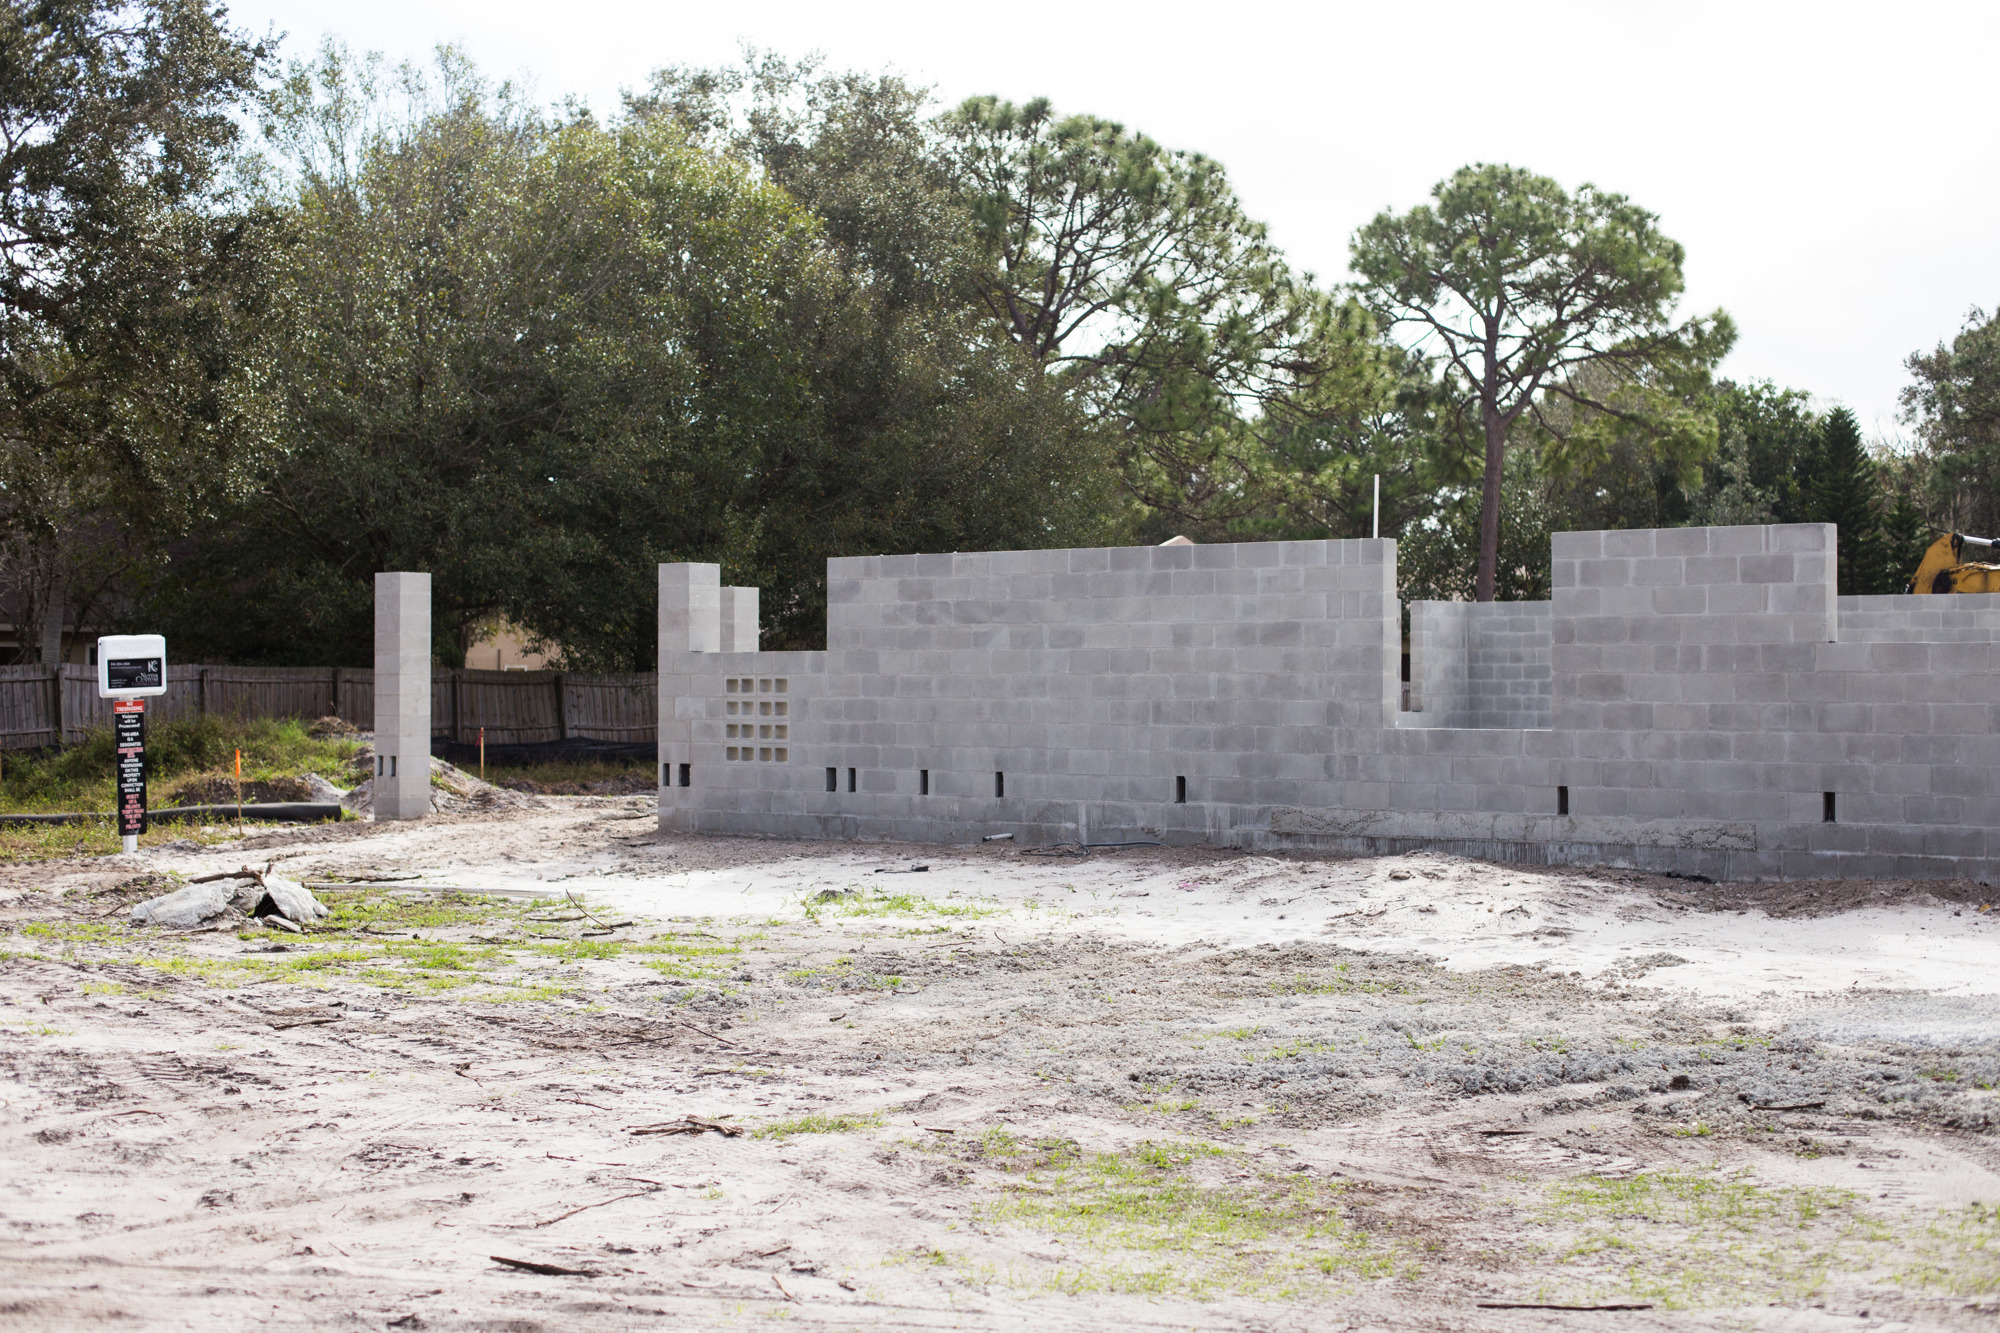 Construction has started on one of the residential homes.